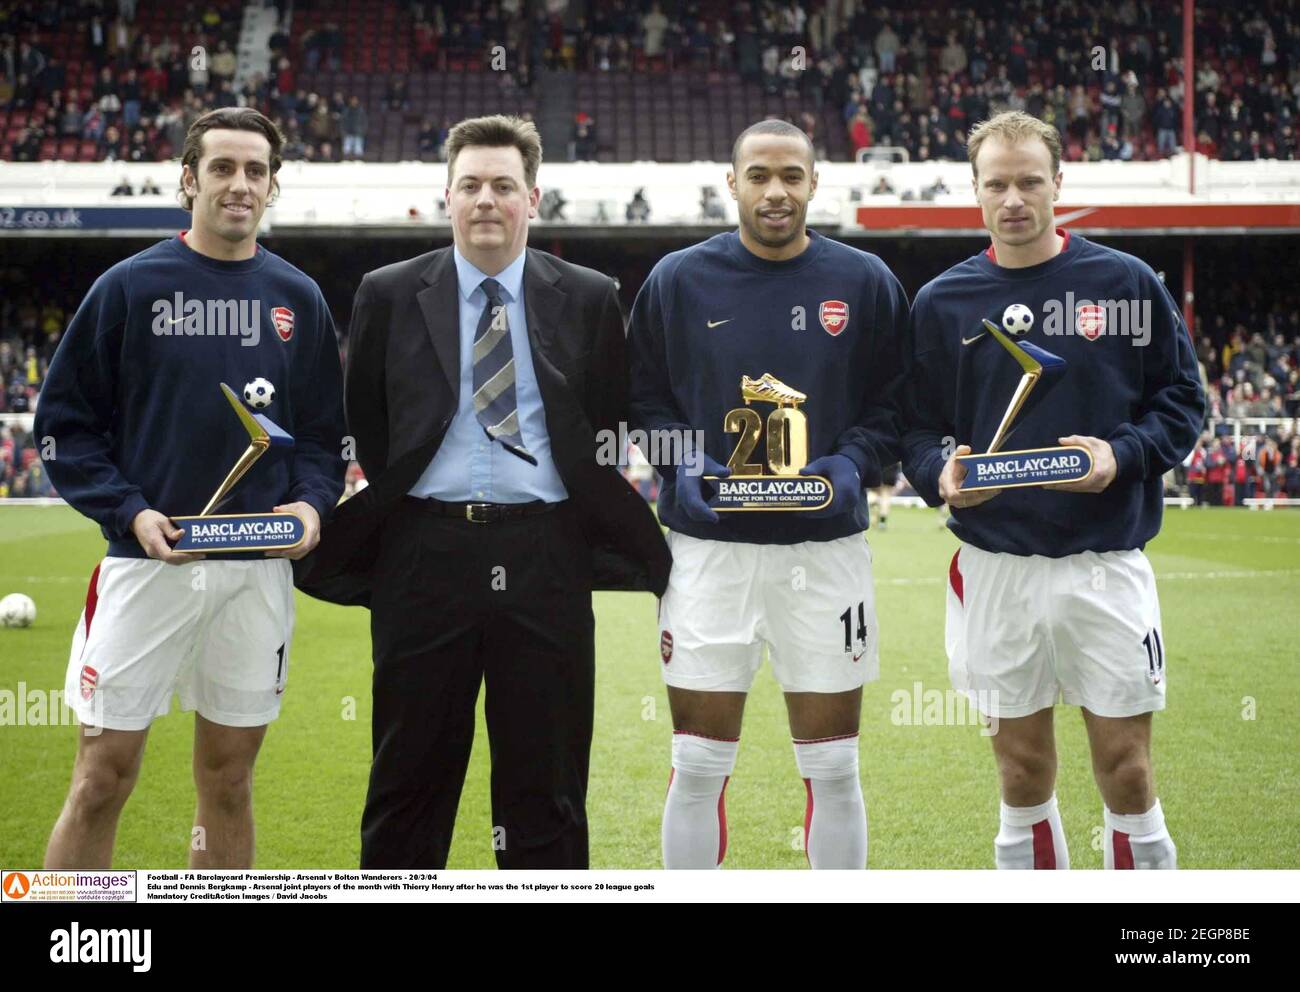 football-fa-barclaycard-premiership-arsenal-v-bolton-wanderers-20304-edu-and-dennis-bergkamp-arsenal-joint-players-of-the-month-with-thierry-henry-after-he-was-the-1st-player-to-score-20-league-goals-mandatory-creditaction-images-david-jacobs-2EGP8BE.jpg